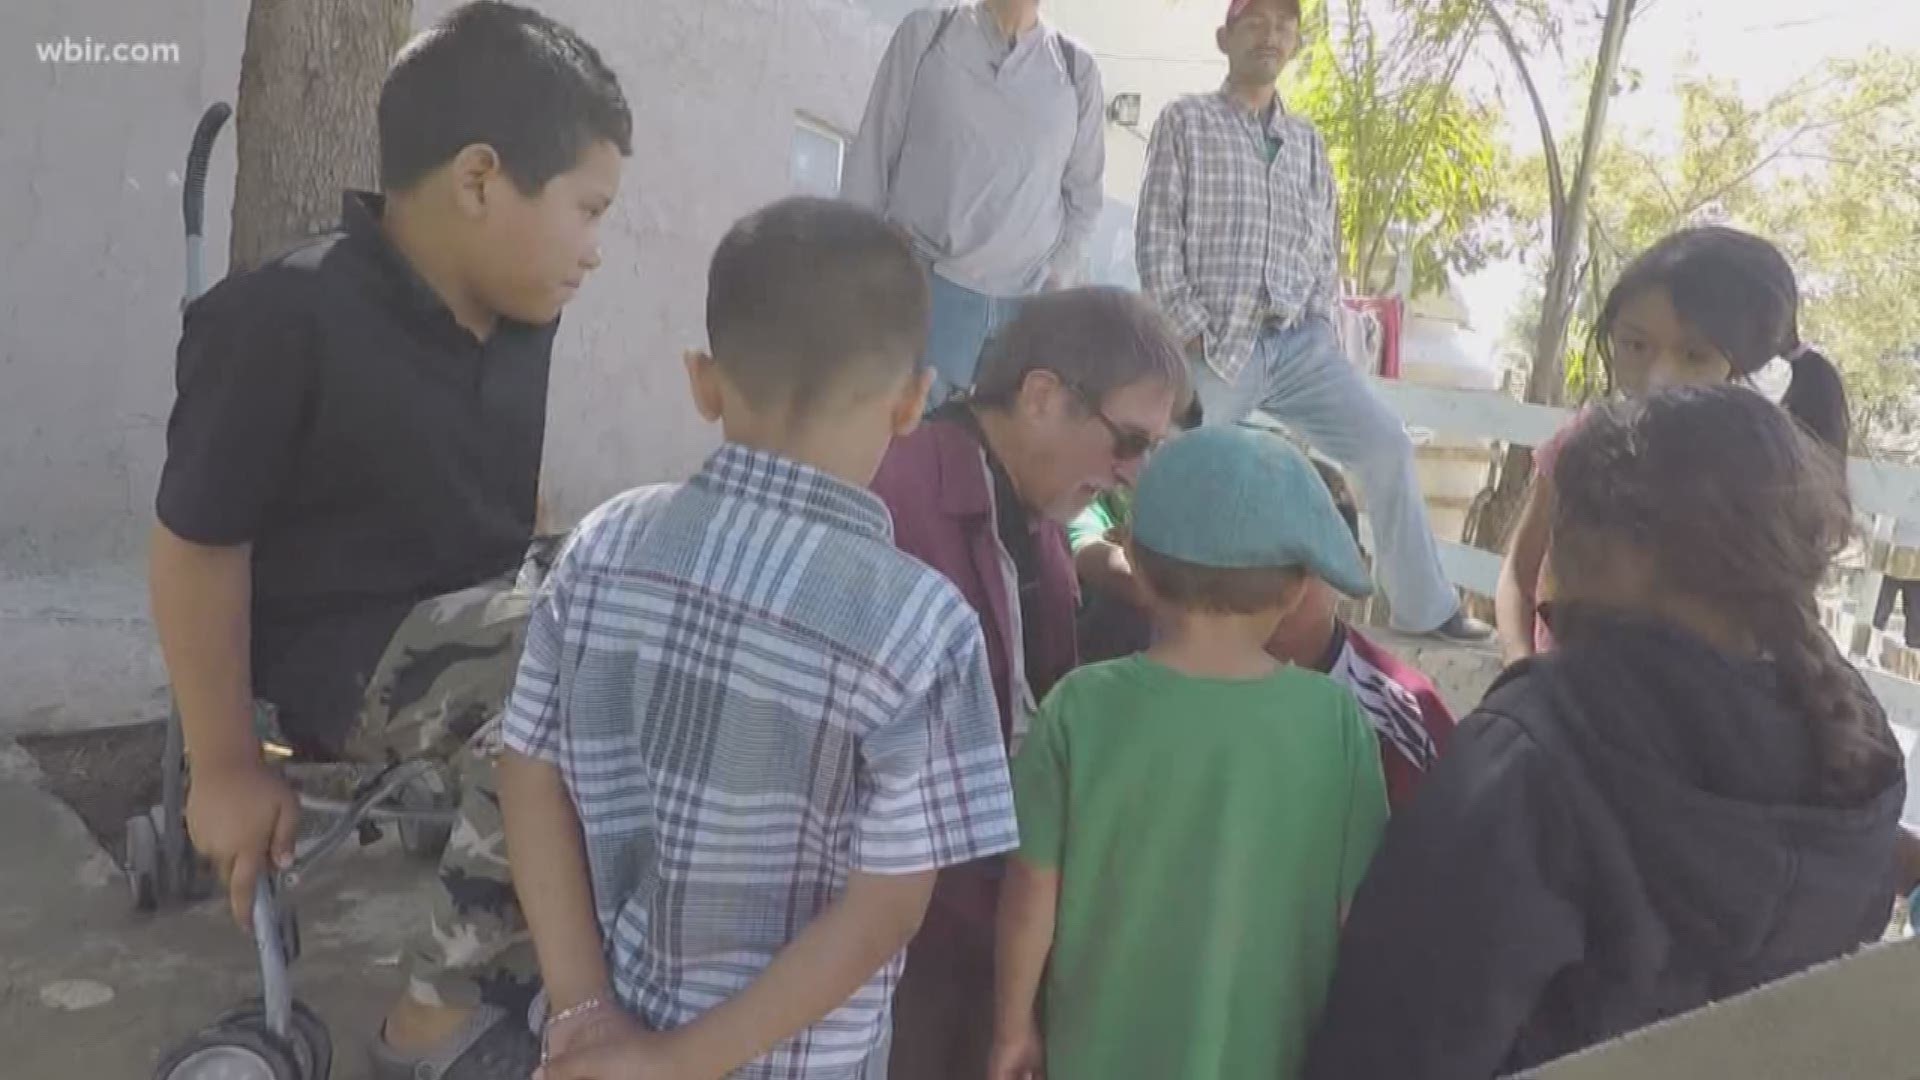 Members of Fellowship Church Knoxville teamed up with a church in Mexico just south of the border to provide medical aid and spiritual guidance to people fleeing their home countries.